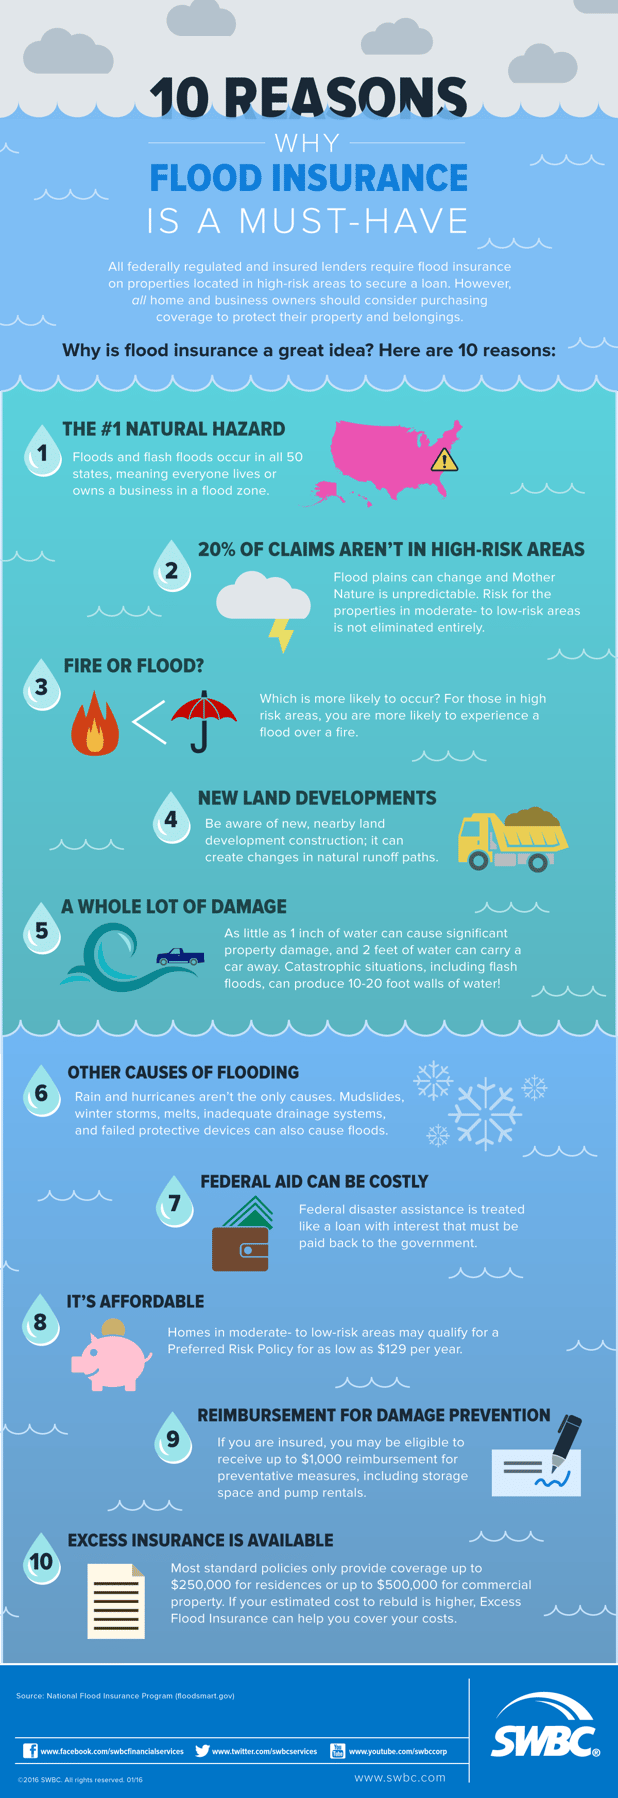 10-Reasons-Why-Flood-Insurance-is-a-Must-Have-01.png